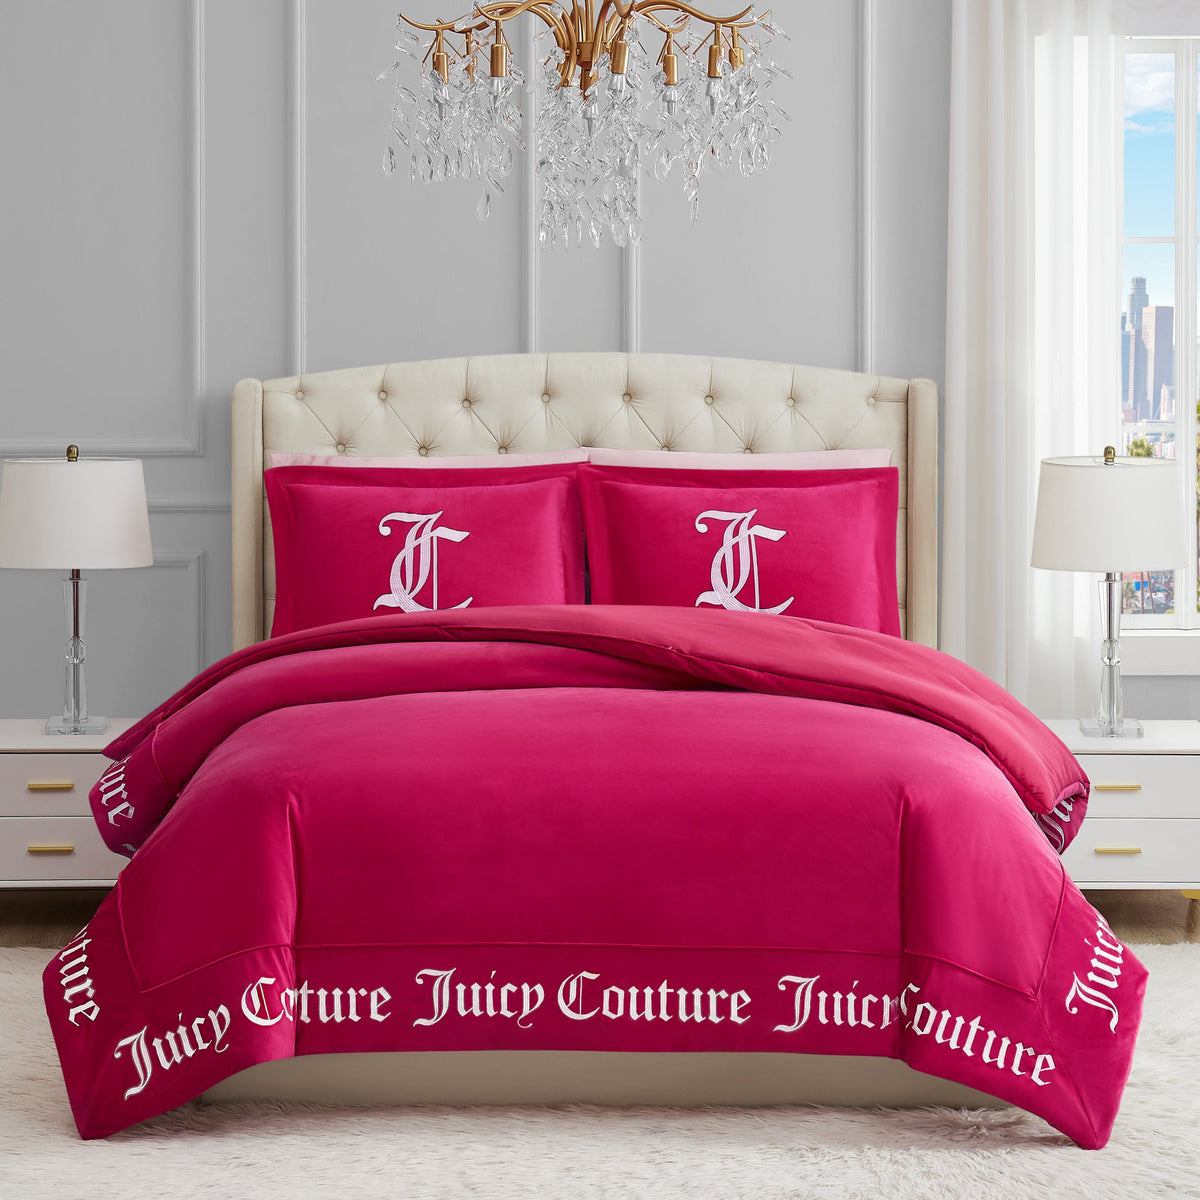 Juicy Couture Gothic Comforter Set Free Love